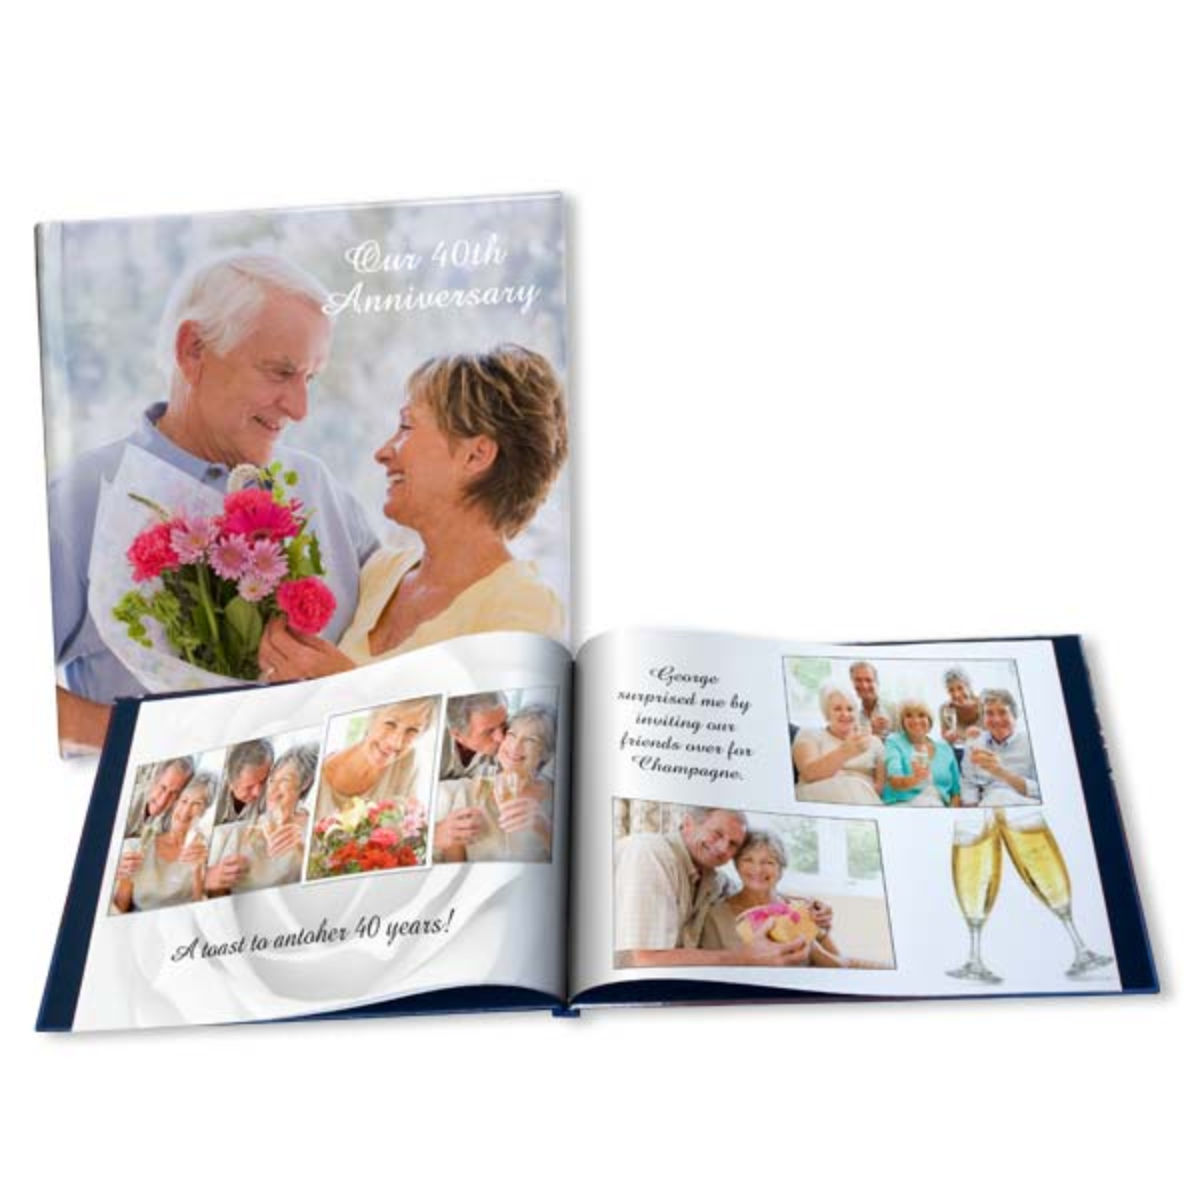 33. Create Lasting Memories with a Personalized Anniversary Book